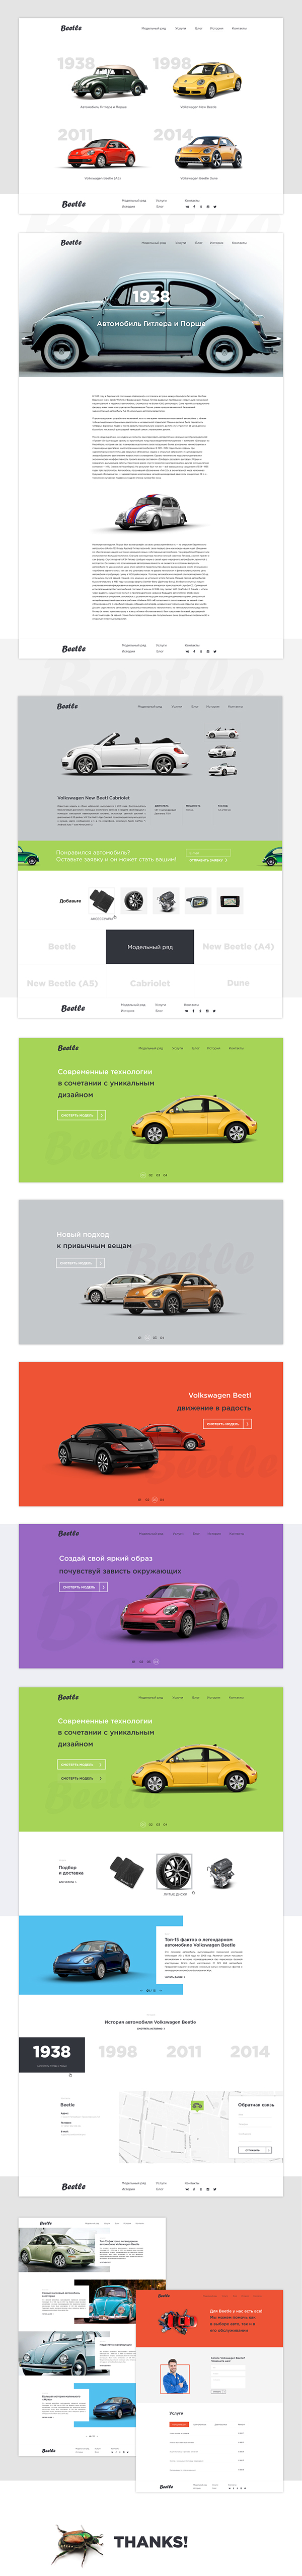 Autoconsulting for Beetle | Website